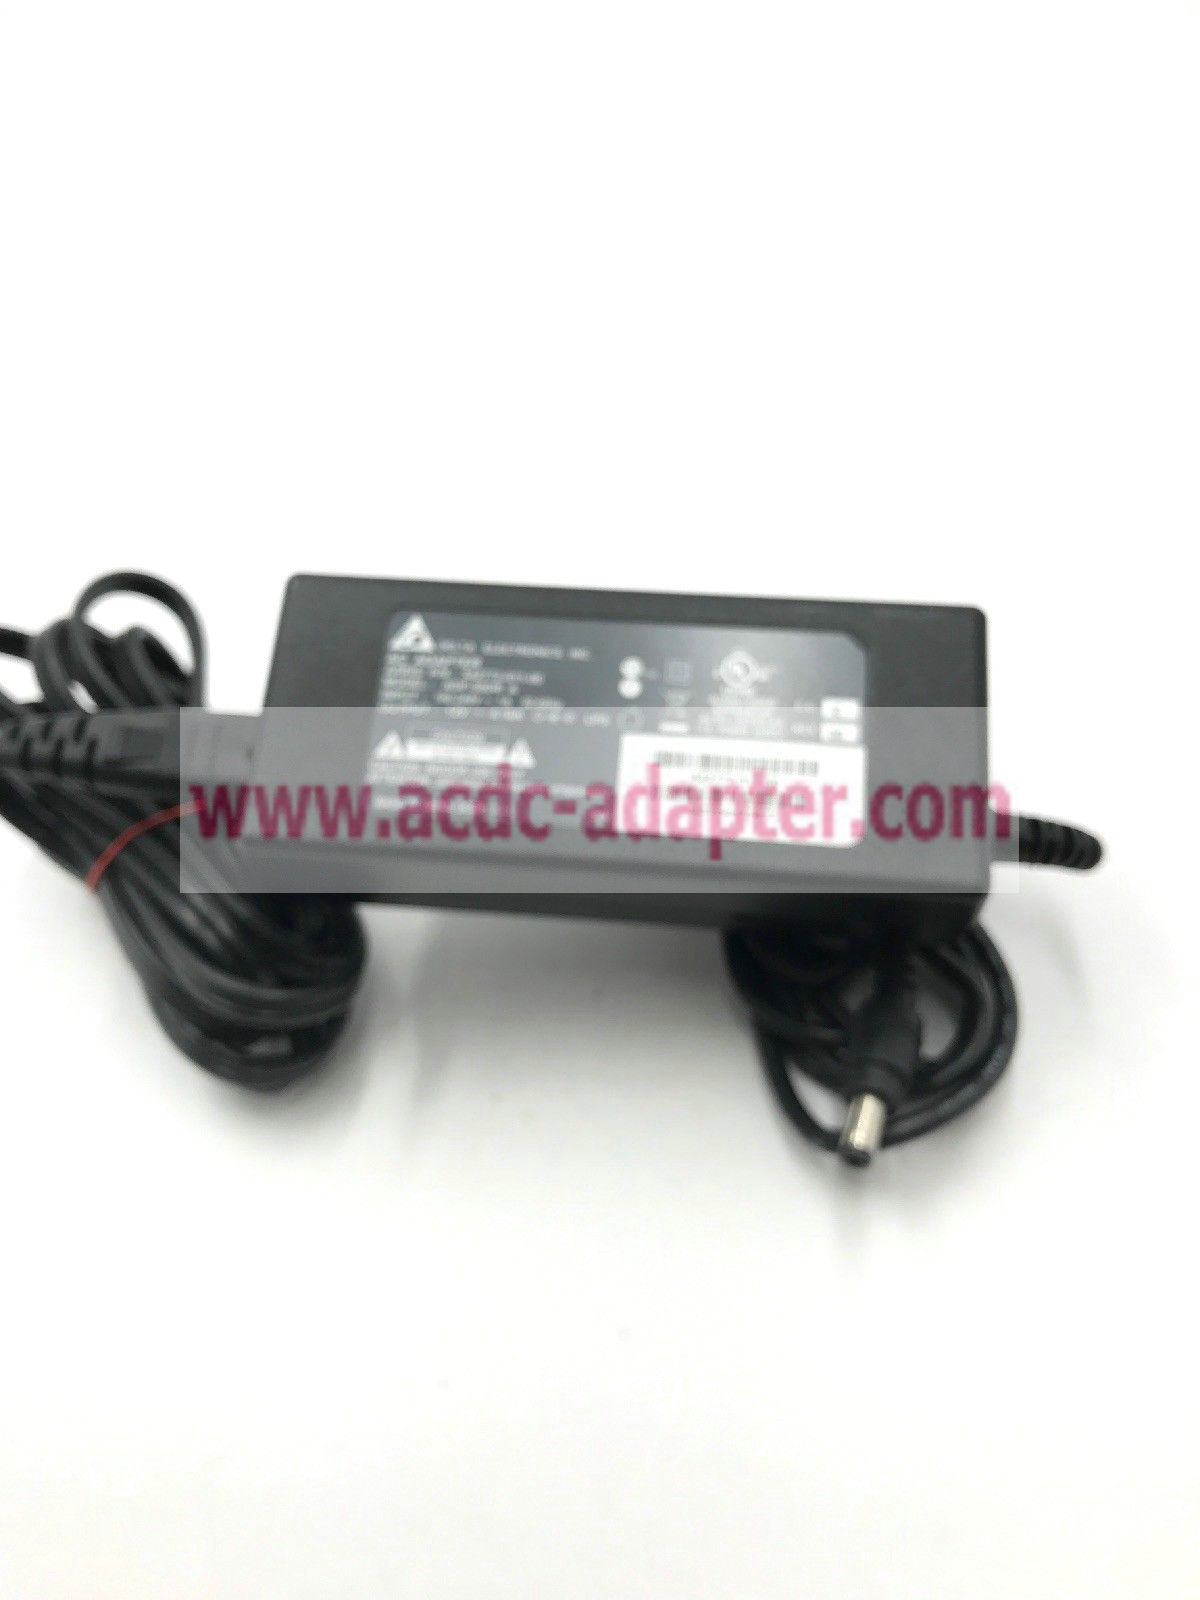 NEW Delta 542772-011-00 ADP-50DR A 12v 4.16a ac adapter power supply